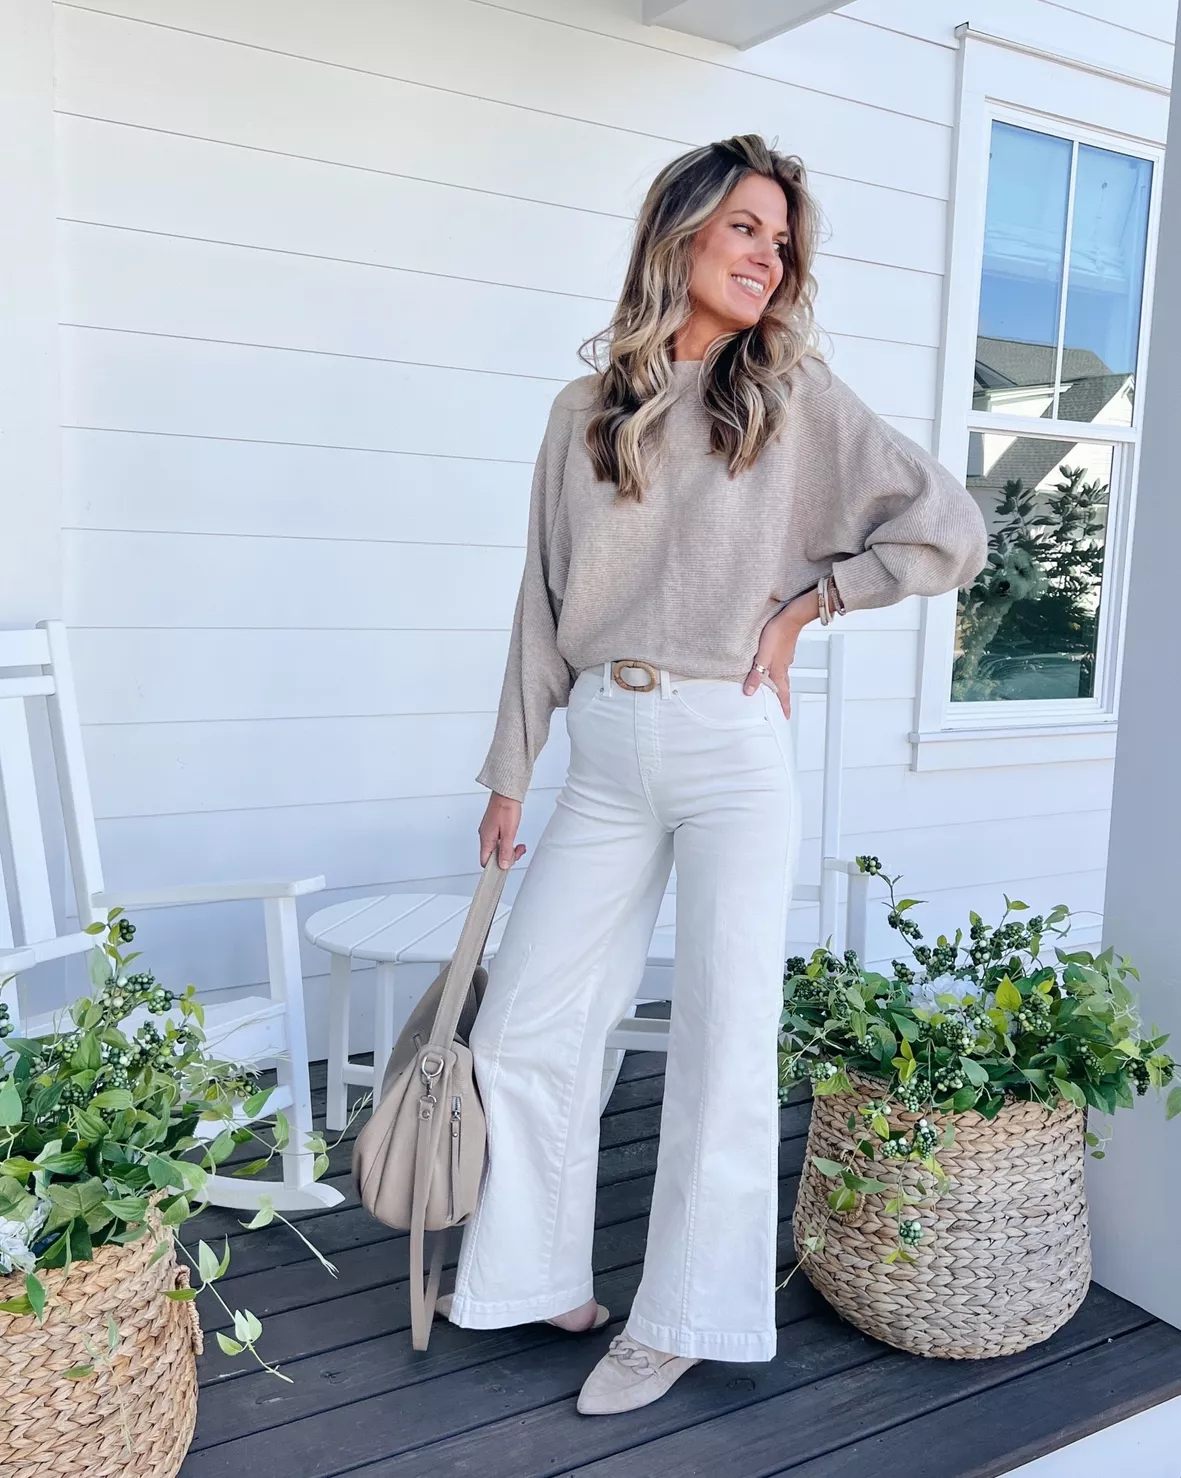 White Wide Leg Pants with Floral Blouse Outfits (2 ideas & outfits